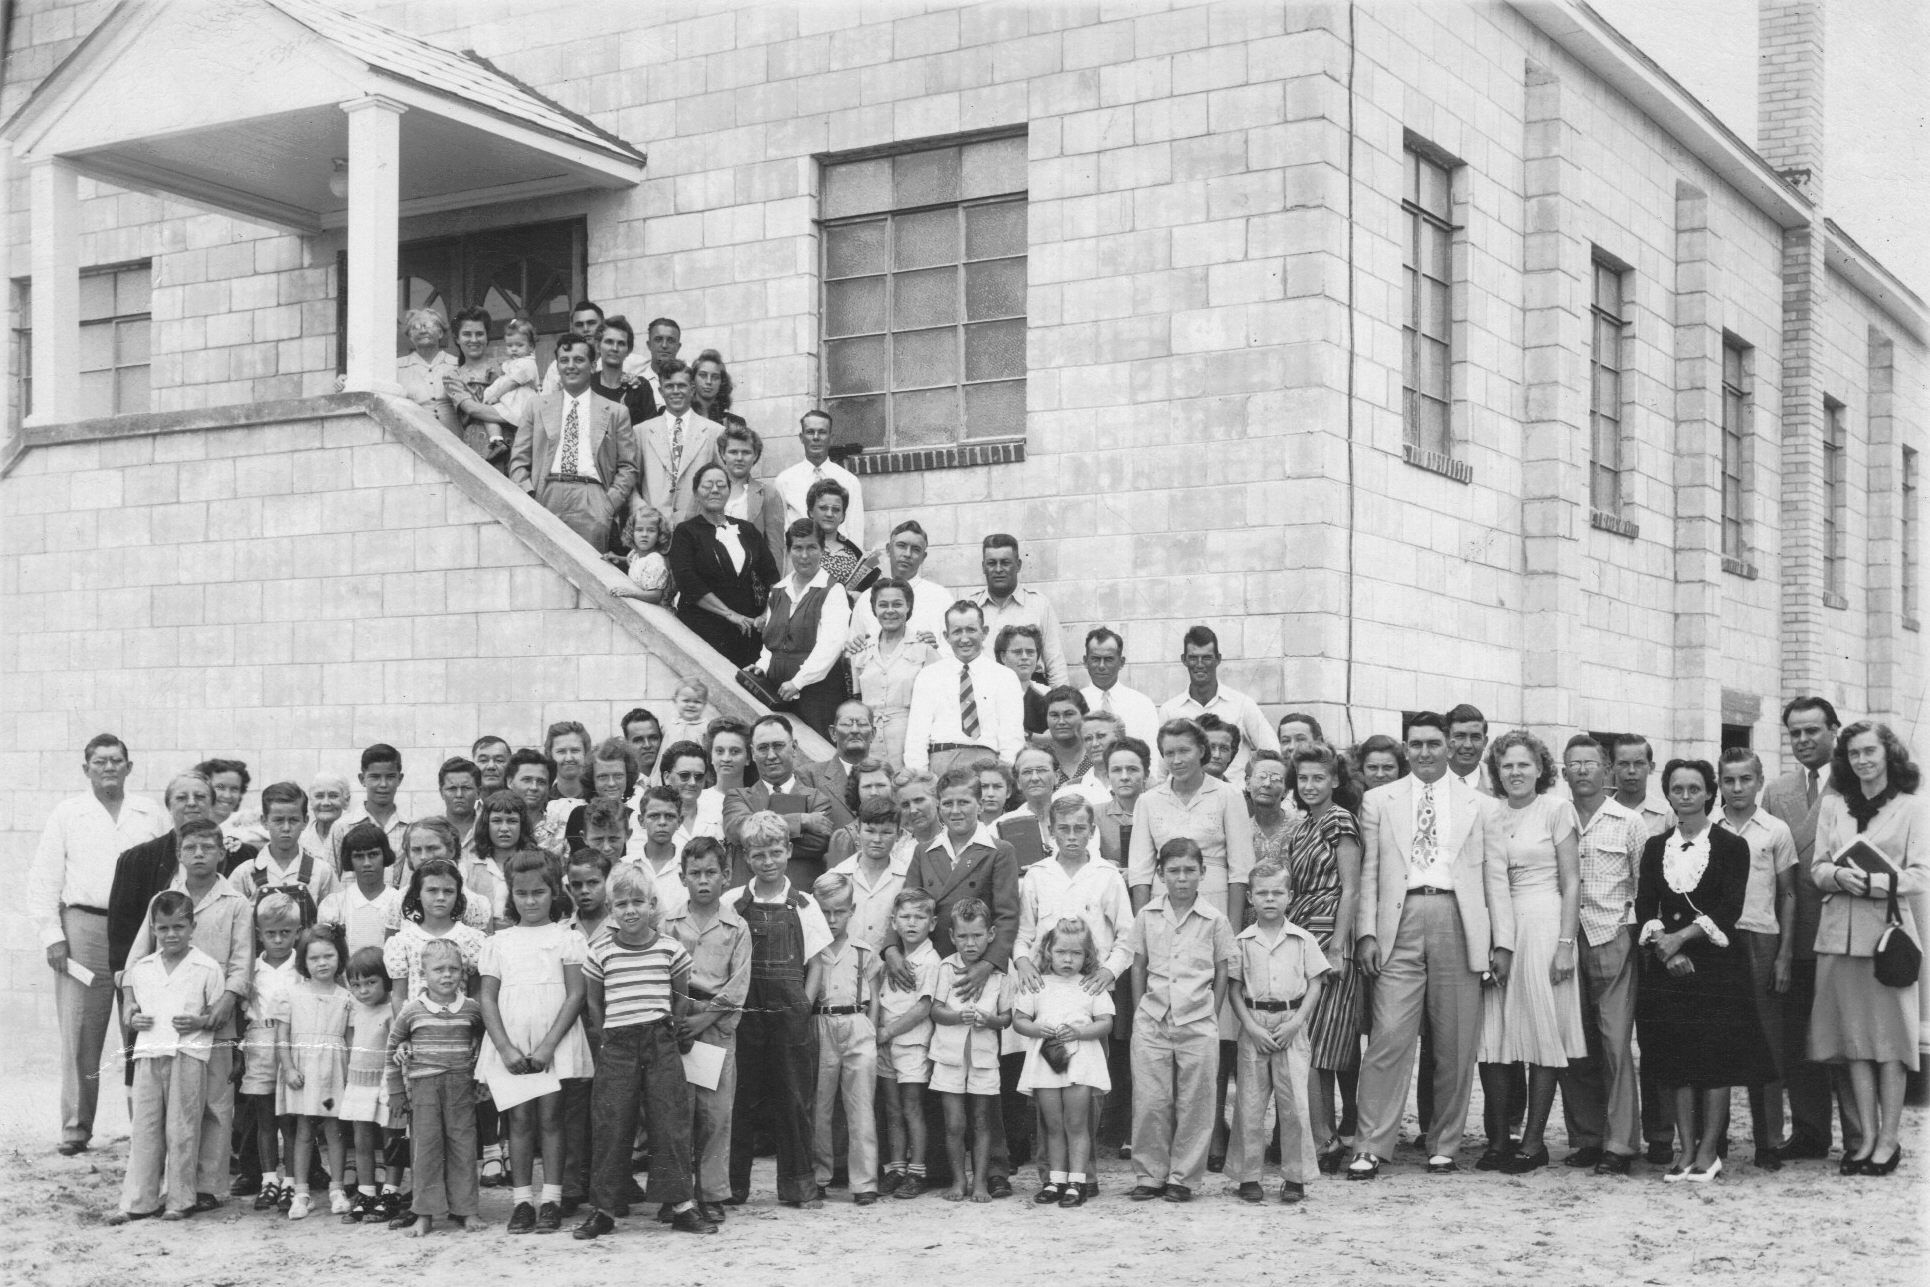 A group photo taken in 1948.